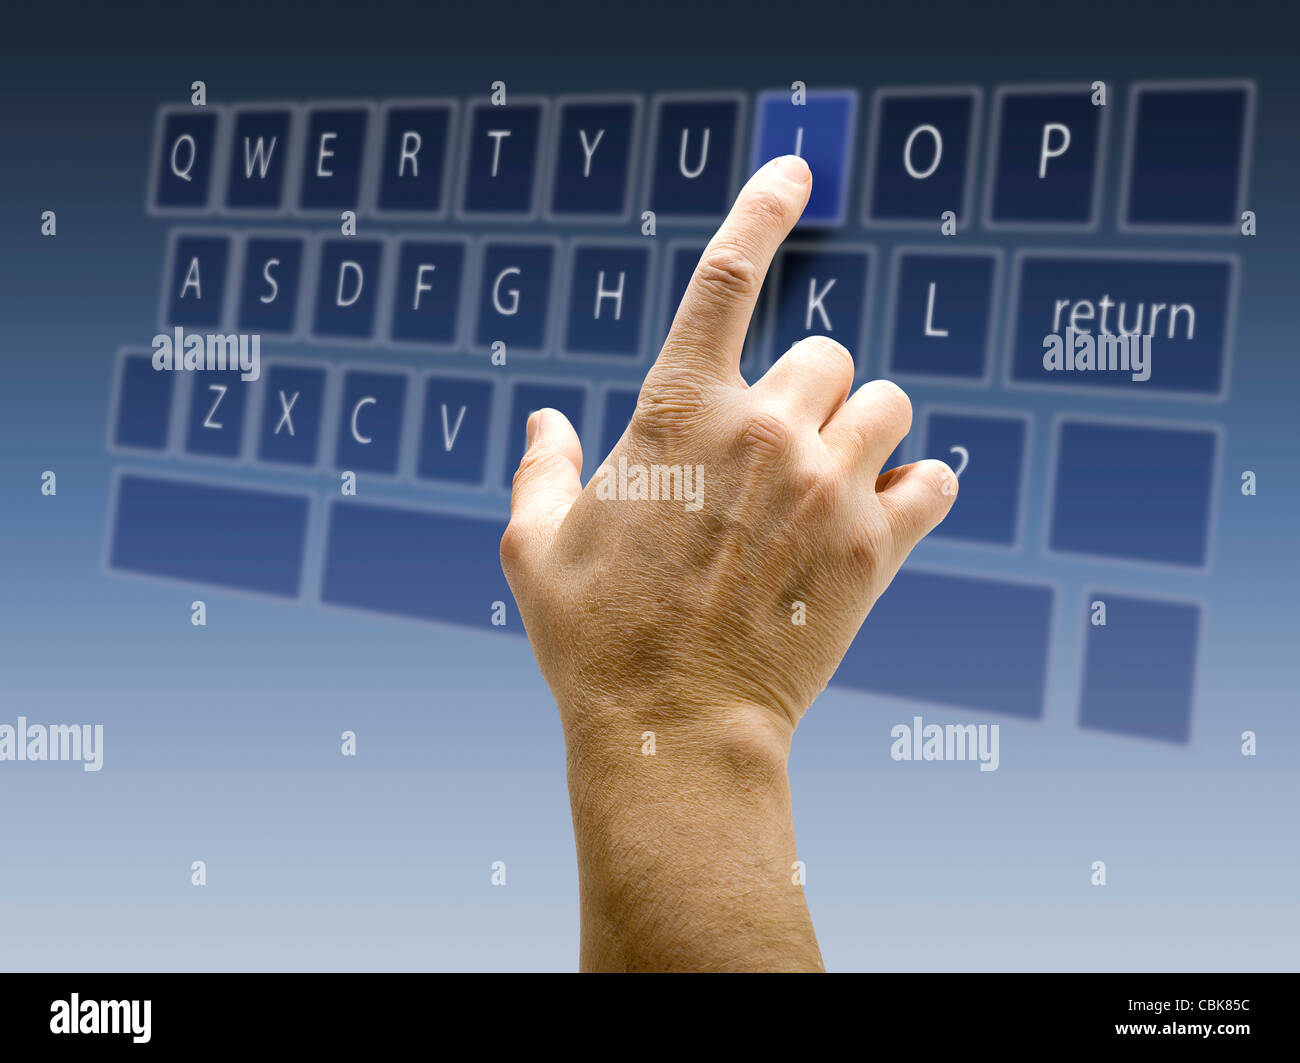 Touchscreen keyboard and interface Stock Photo - Alamy